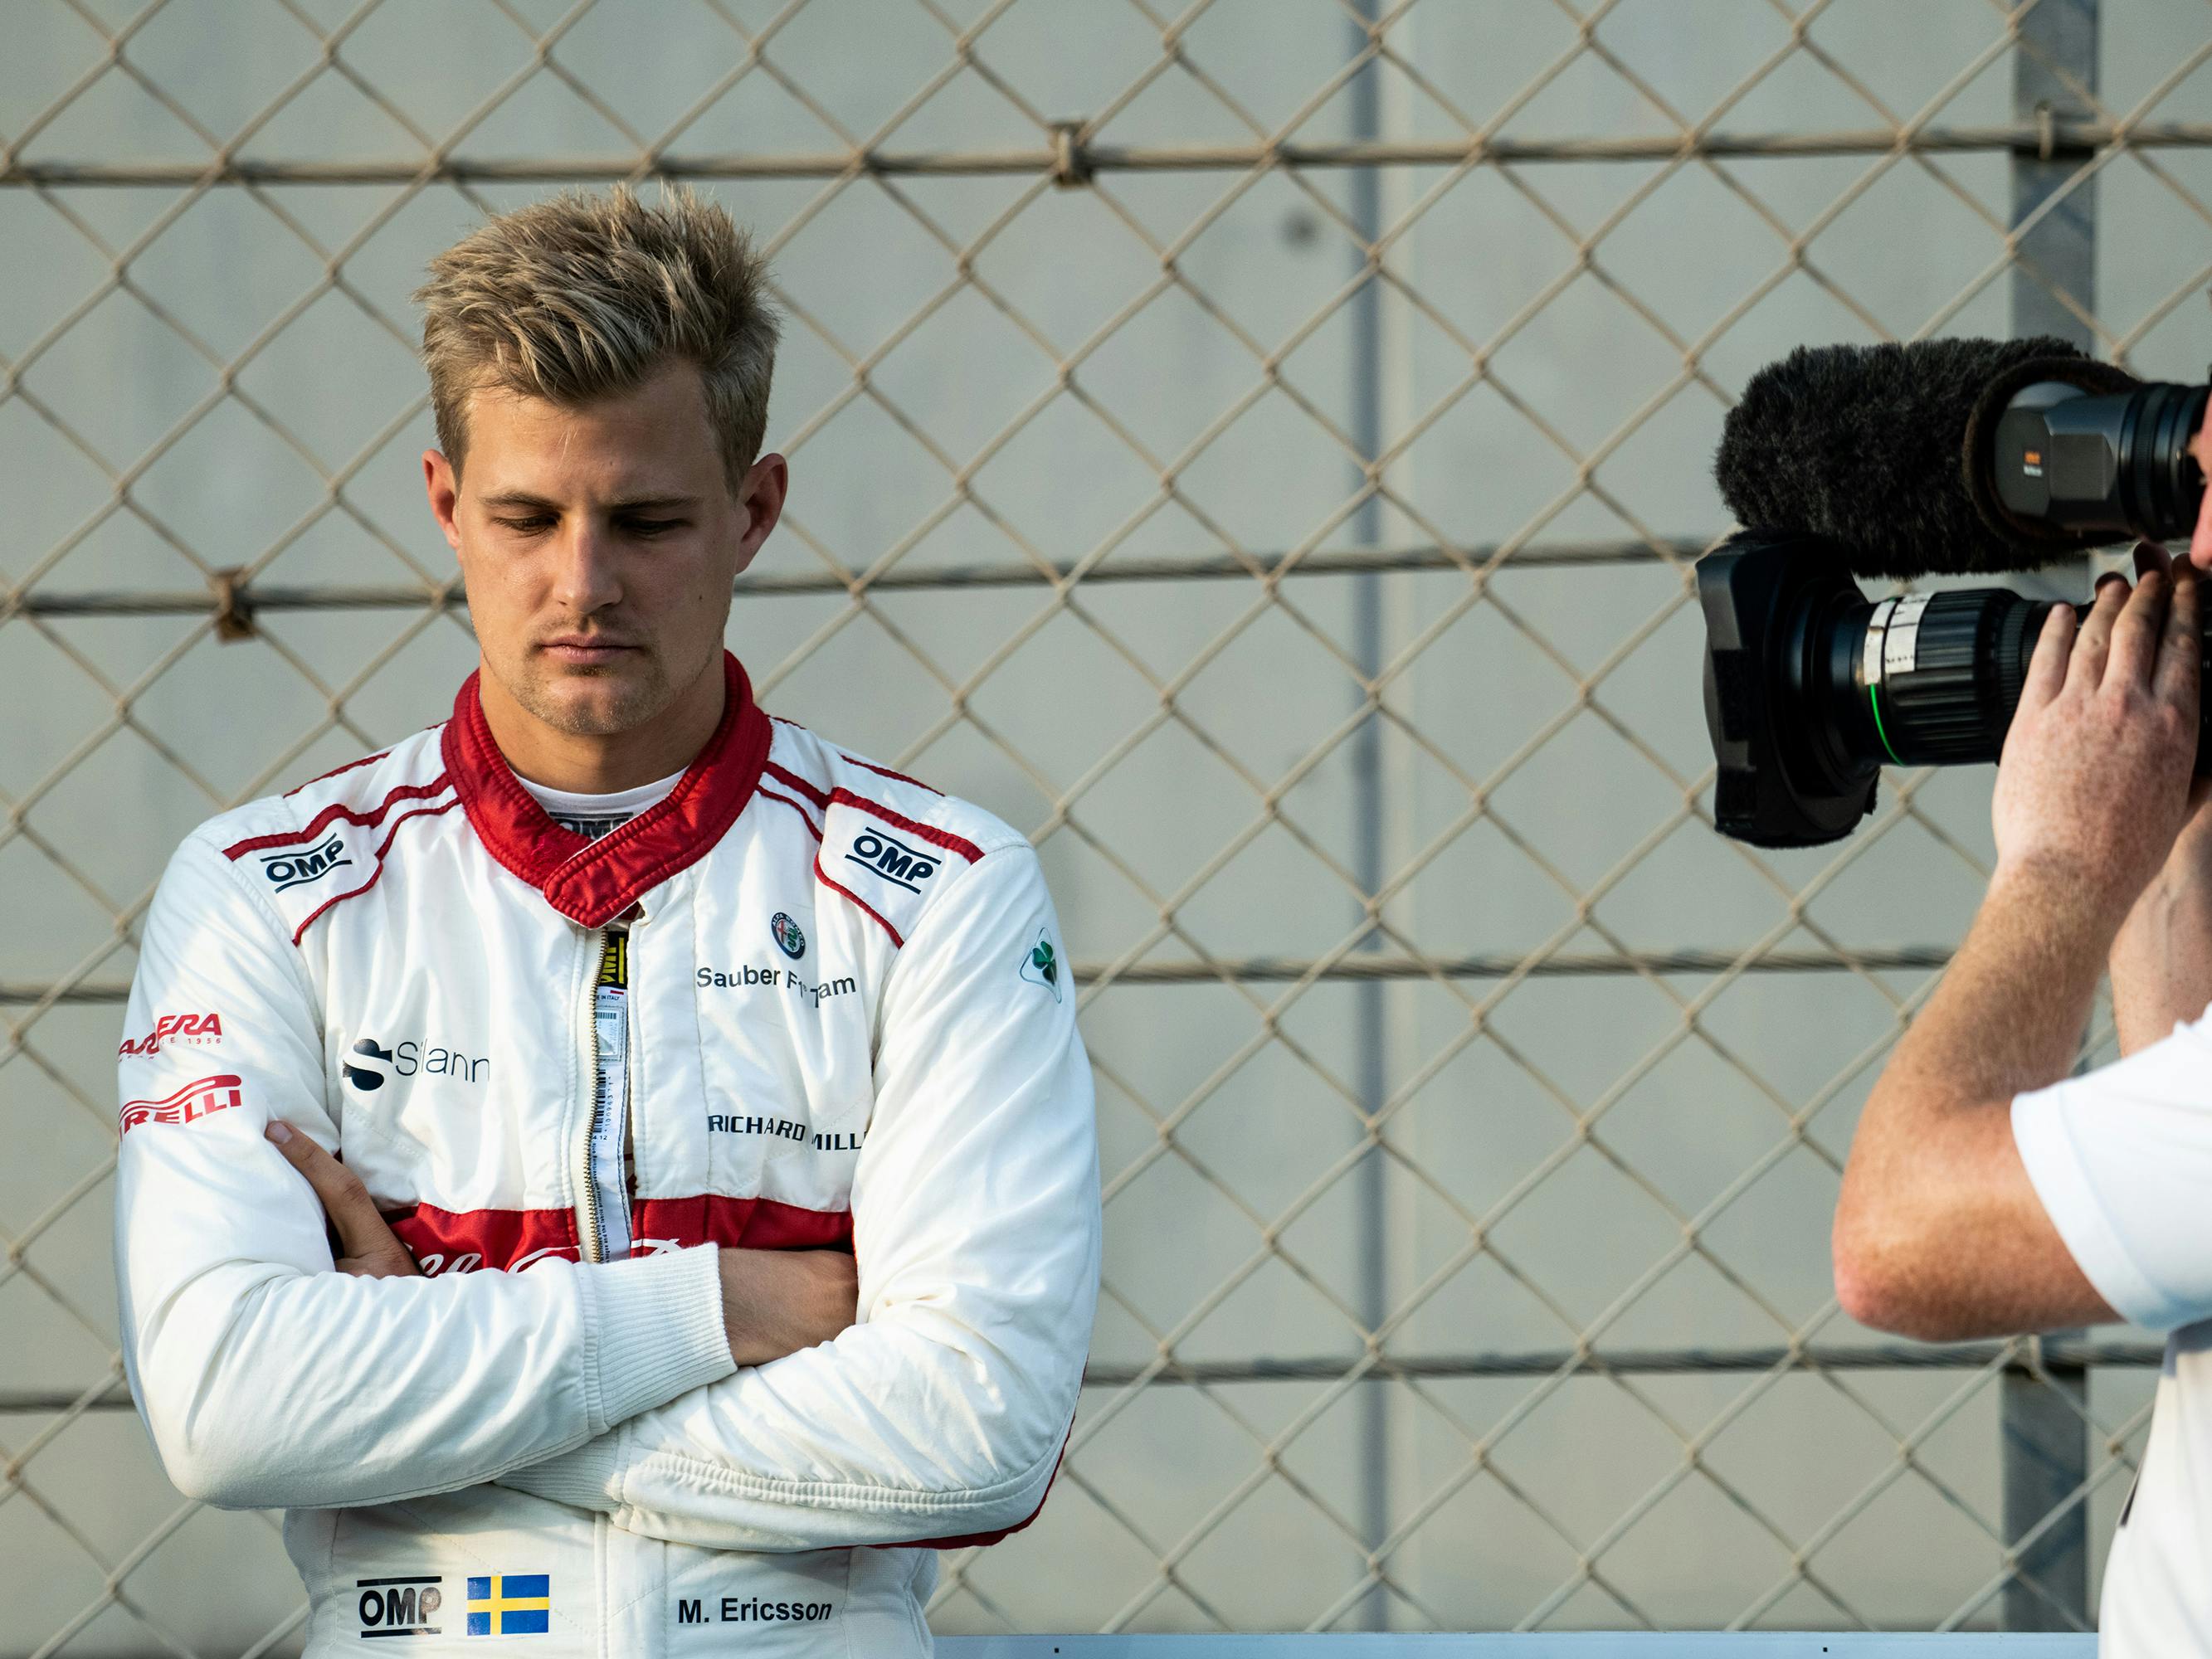 Marcus Ericsson wears a white-and-red sponsored shirt and looks grim. Don’t be sad — you’re on camera!